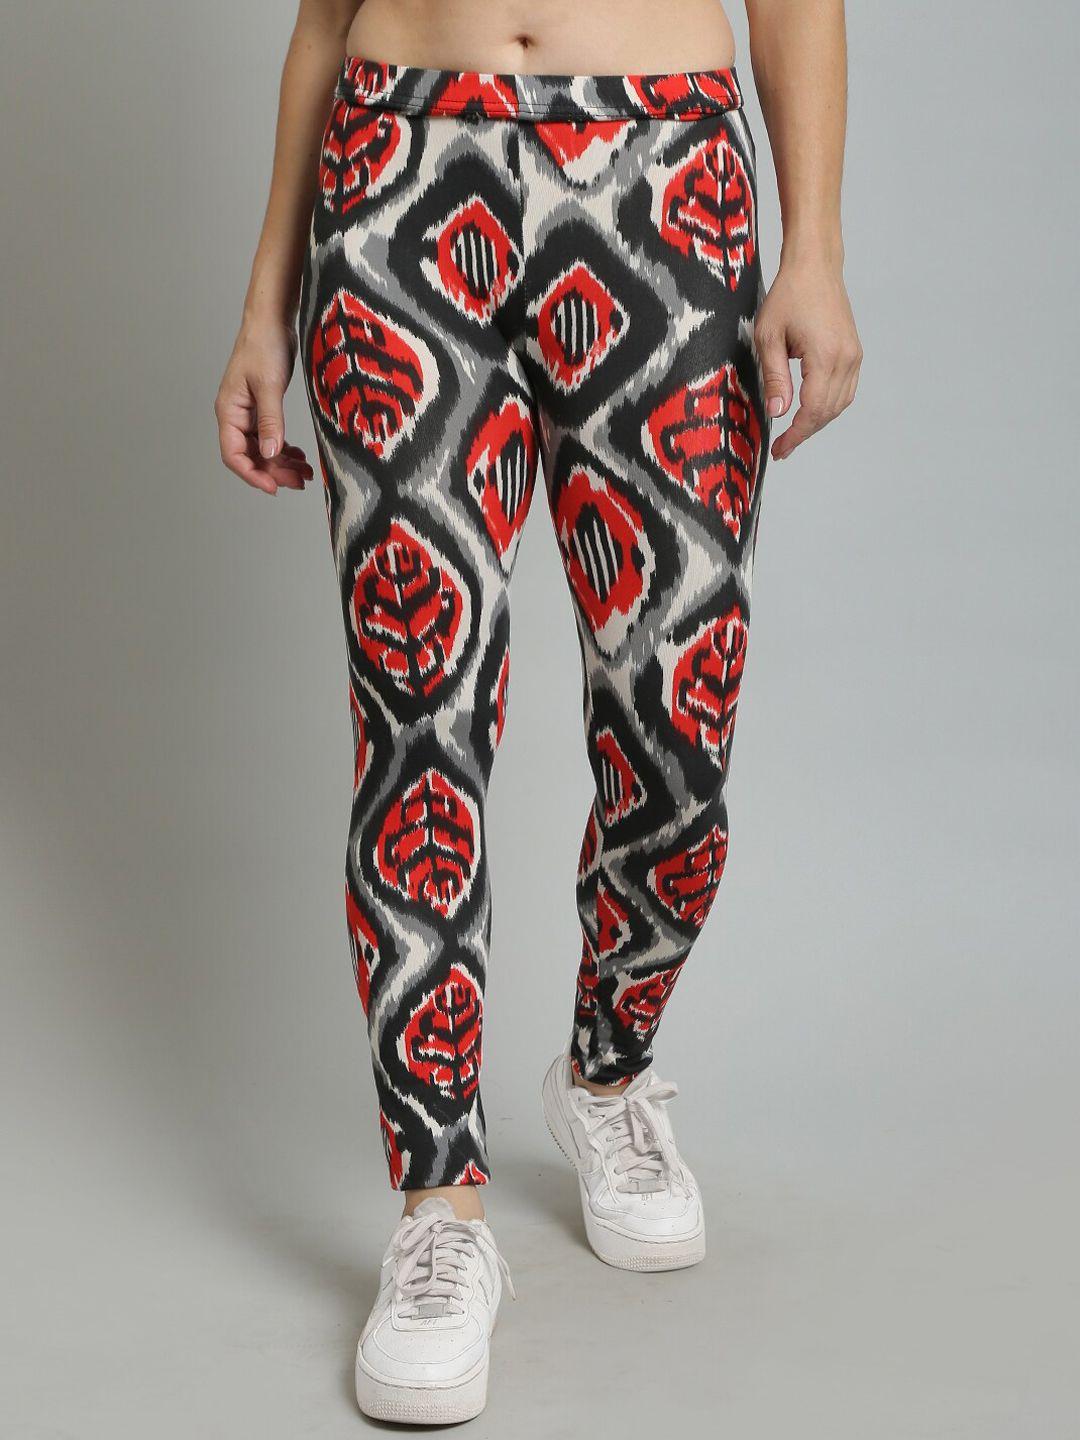 n-gal abstract printed ankle length tights